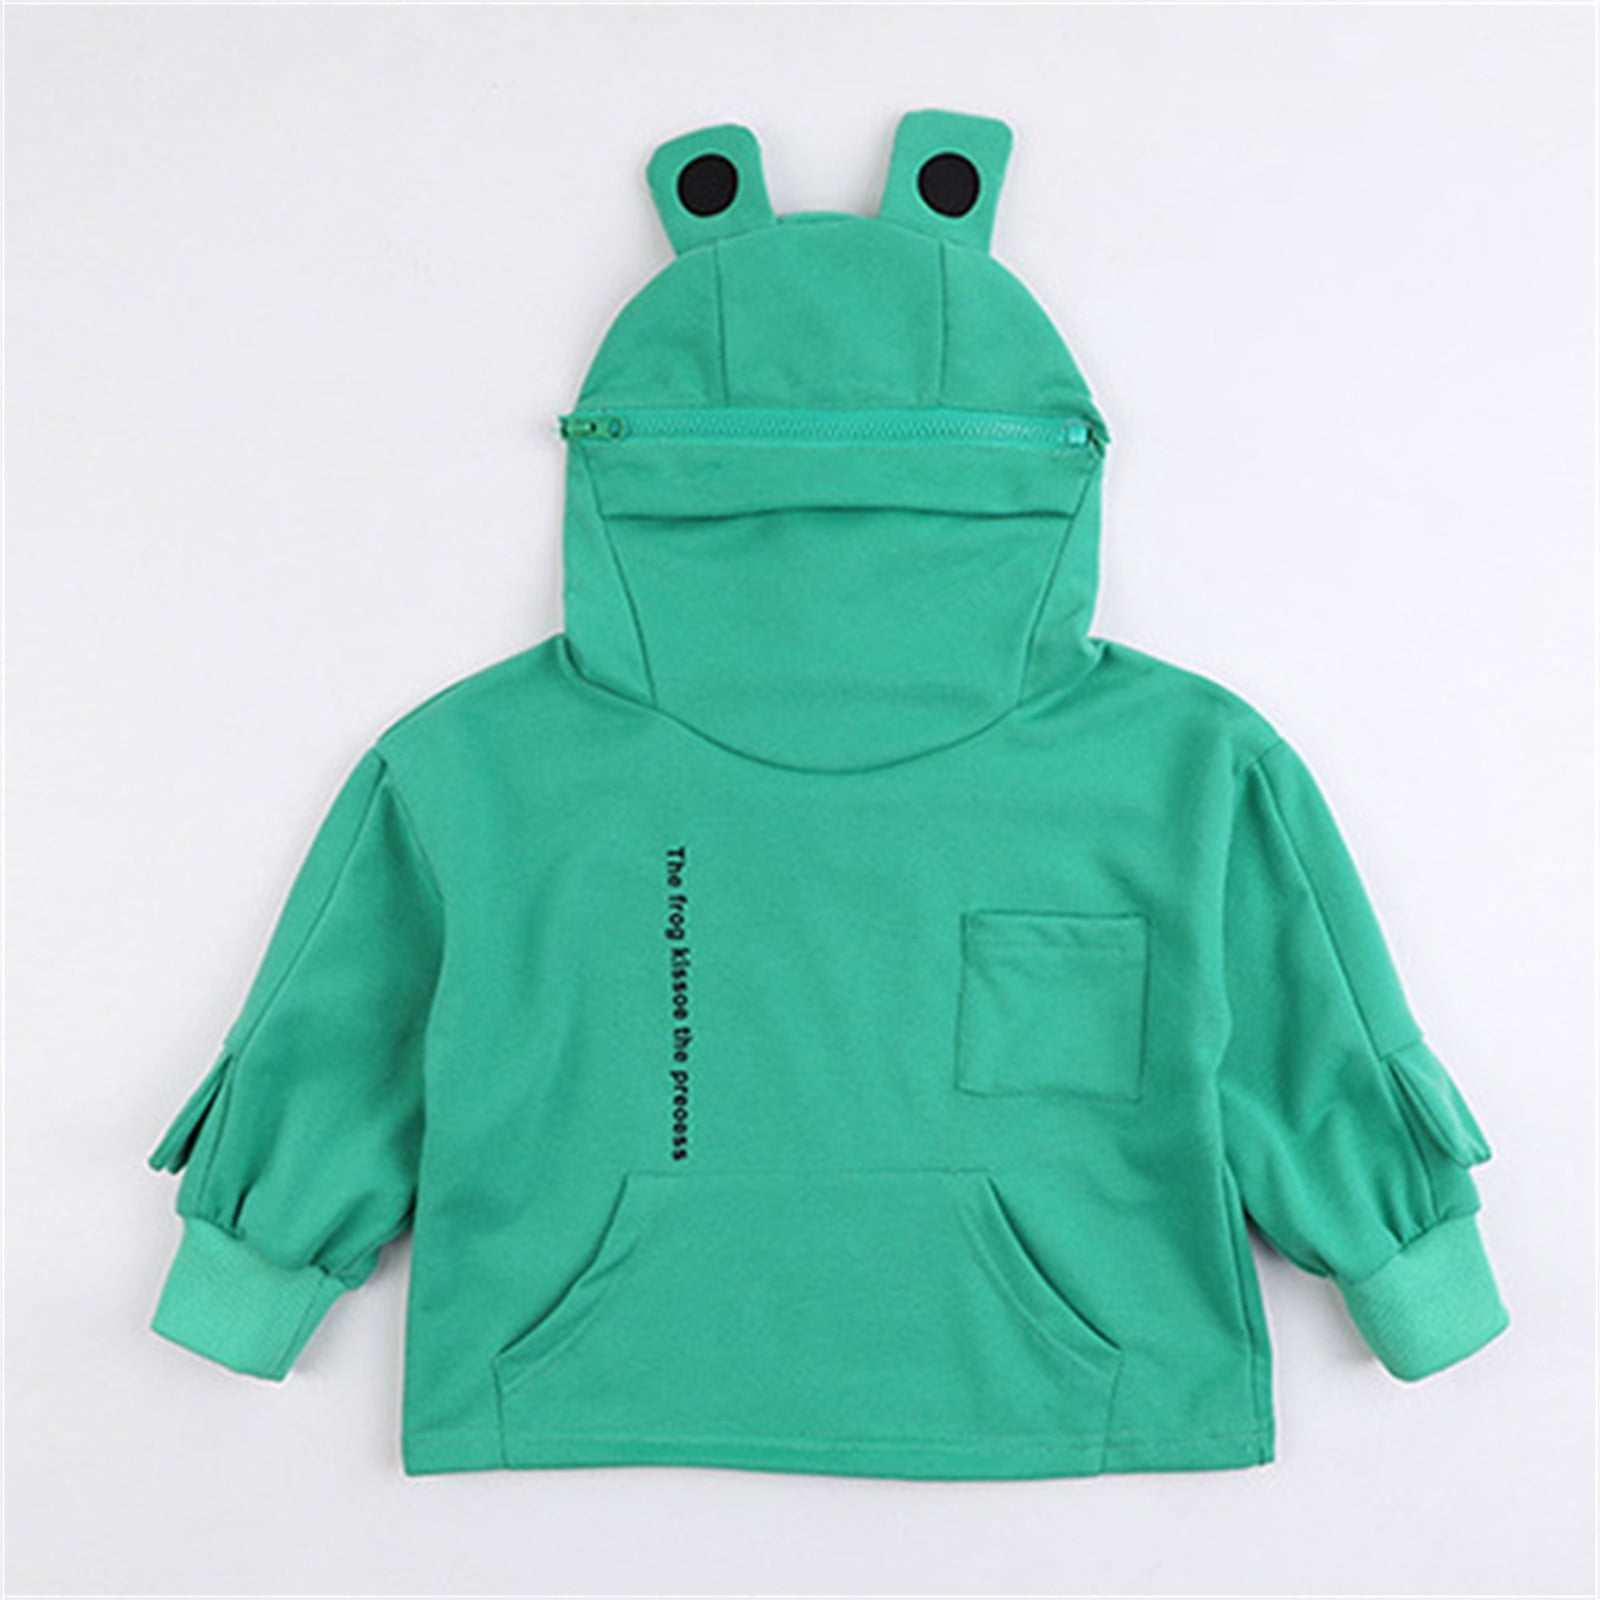 Sweatshirt Mouth Zipper Warm Sweaters With Baby Pocket Girls Hoodies Pullover Boys And Large Girls Kids Hooded Toddler Sweater Tops Toddler 3D Cartoon Cat